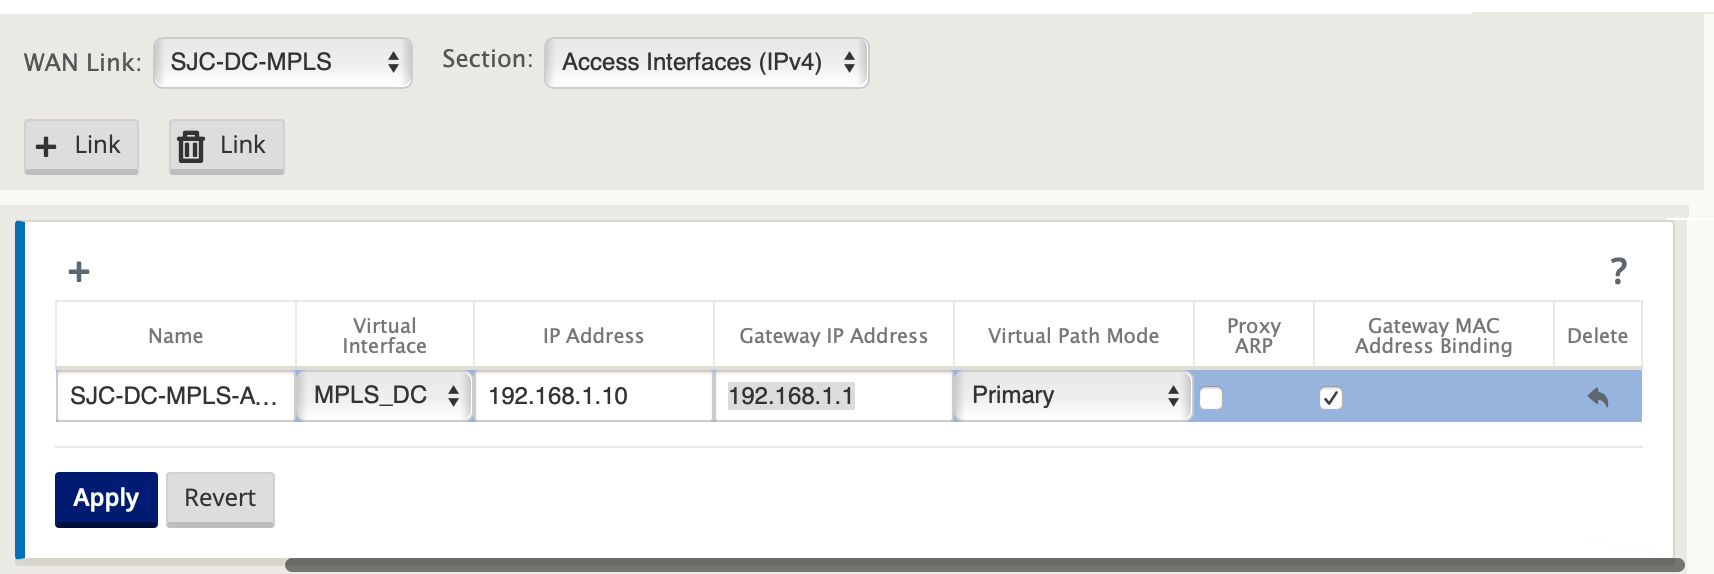 MPLS access interfaces